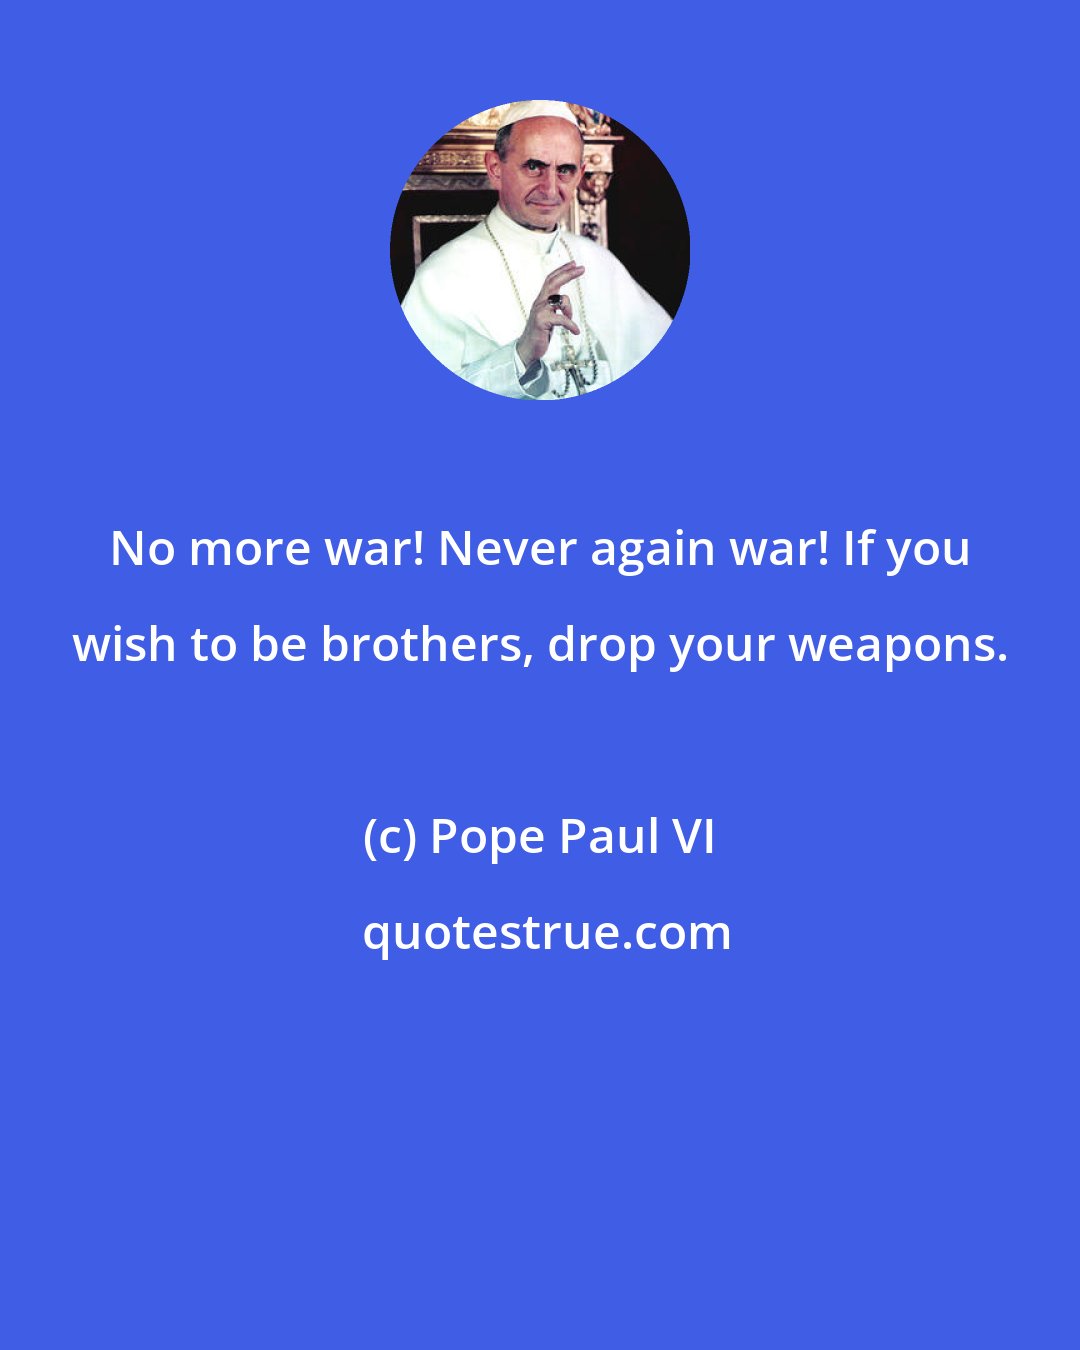 Pope Paul VI: No more war! Never again war! If you wish to be brothers, drop your weapons.